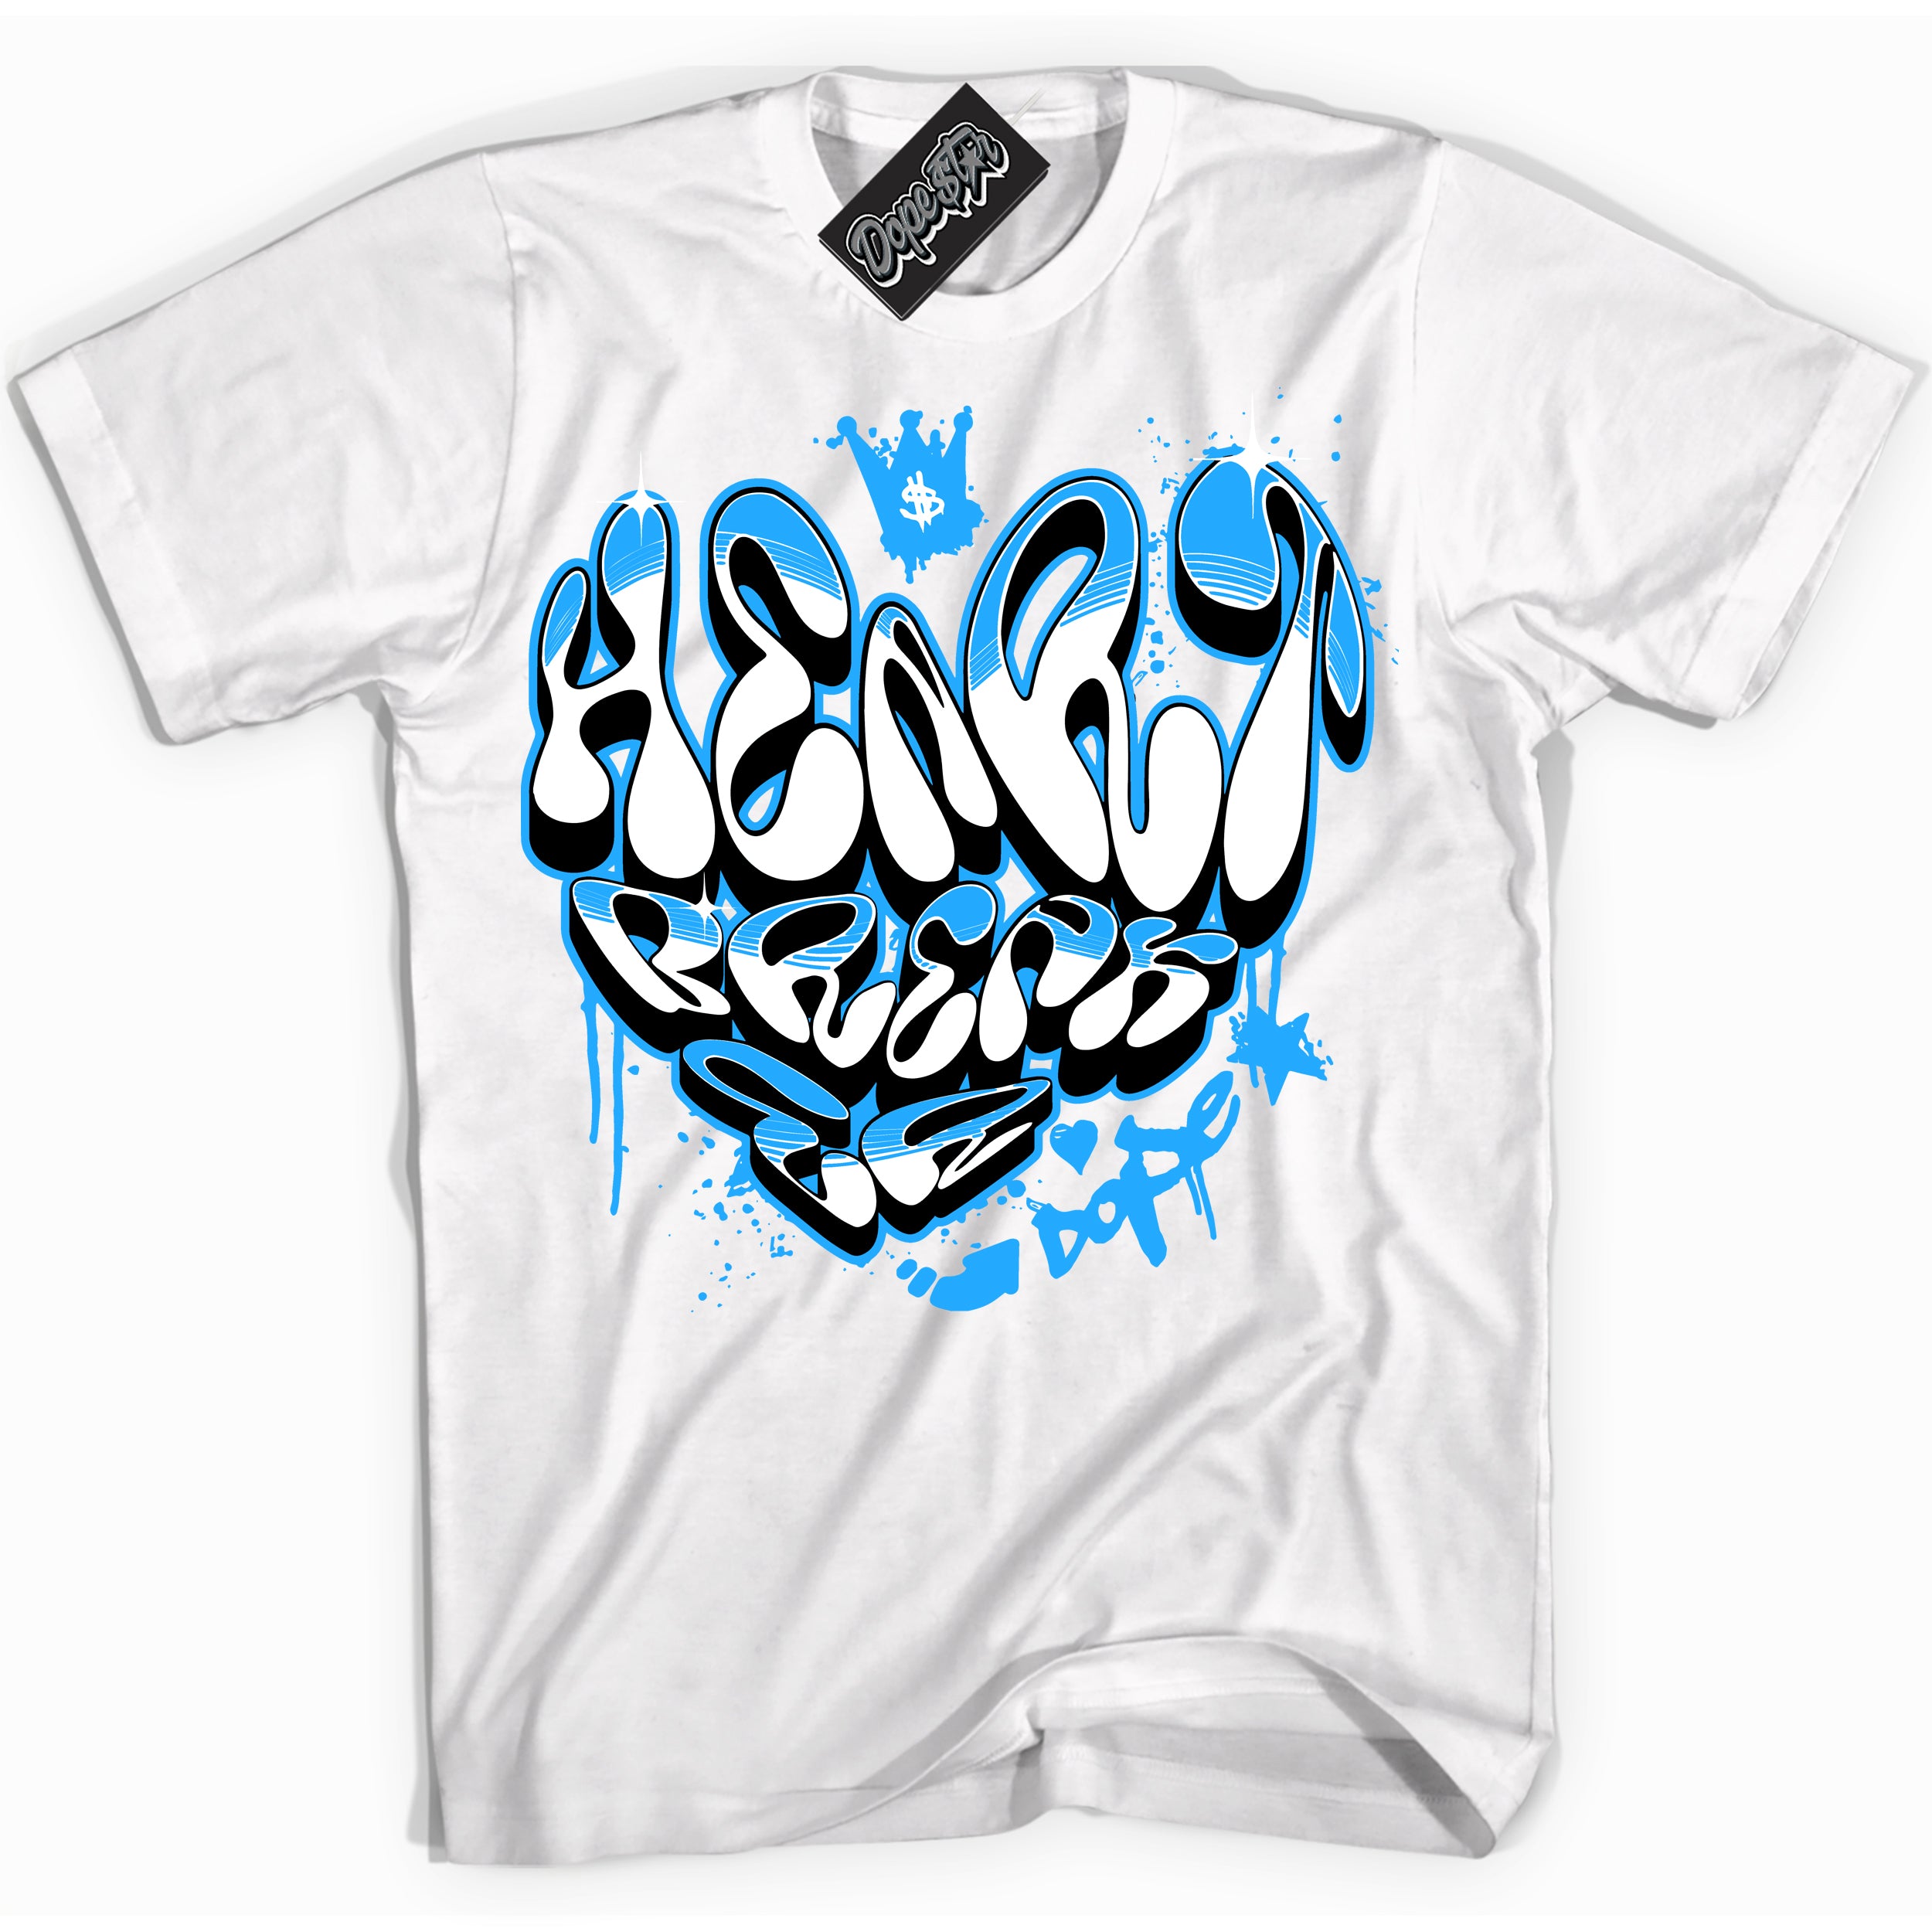 Cool White graphic tee with “ Heartbreaker Graffiti ” design, that perfectly matches Powder Blue 9s sneakers 